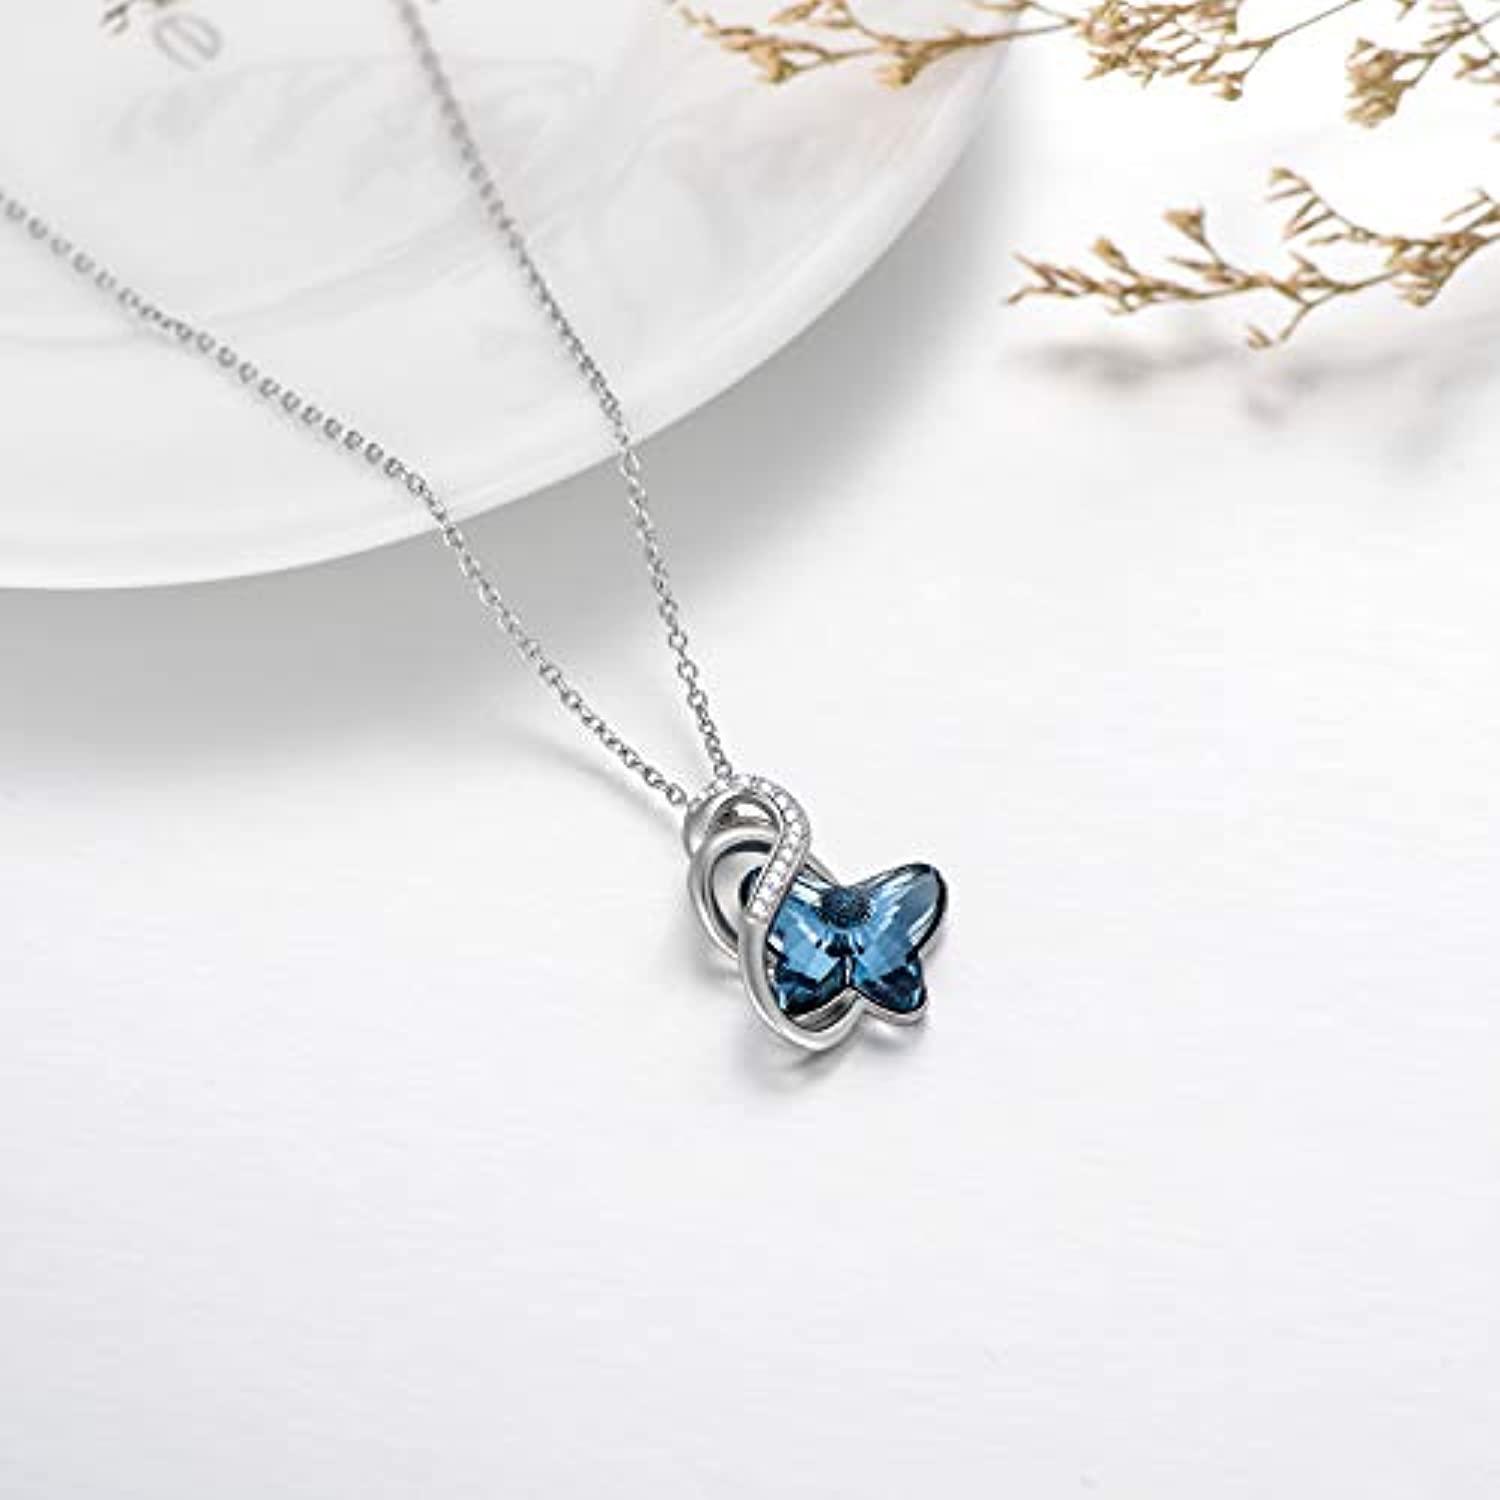 Lillia Butterfly Silver Pendant Necklace in Dichroic Glass – Smyth Jewelers